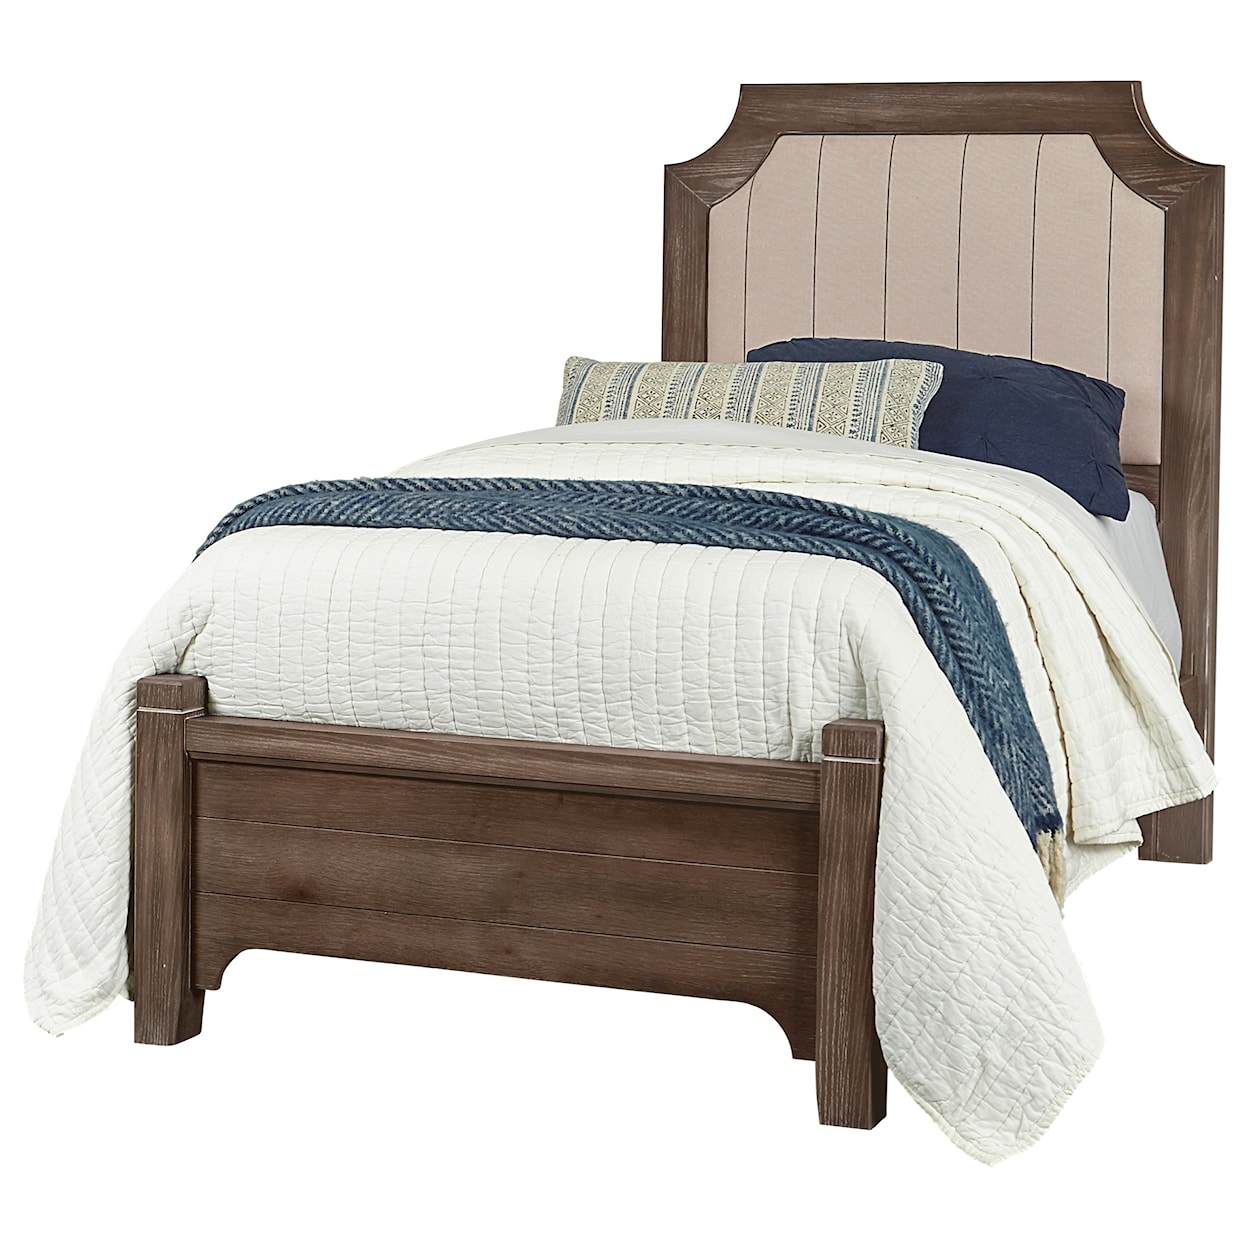 Vaughan-Bassett Bungalow Twin Upholstered Bed